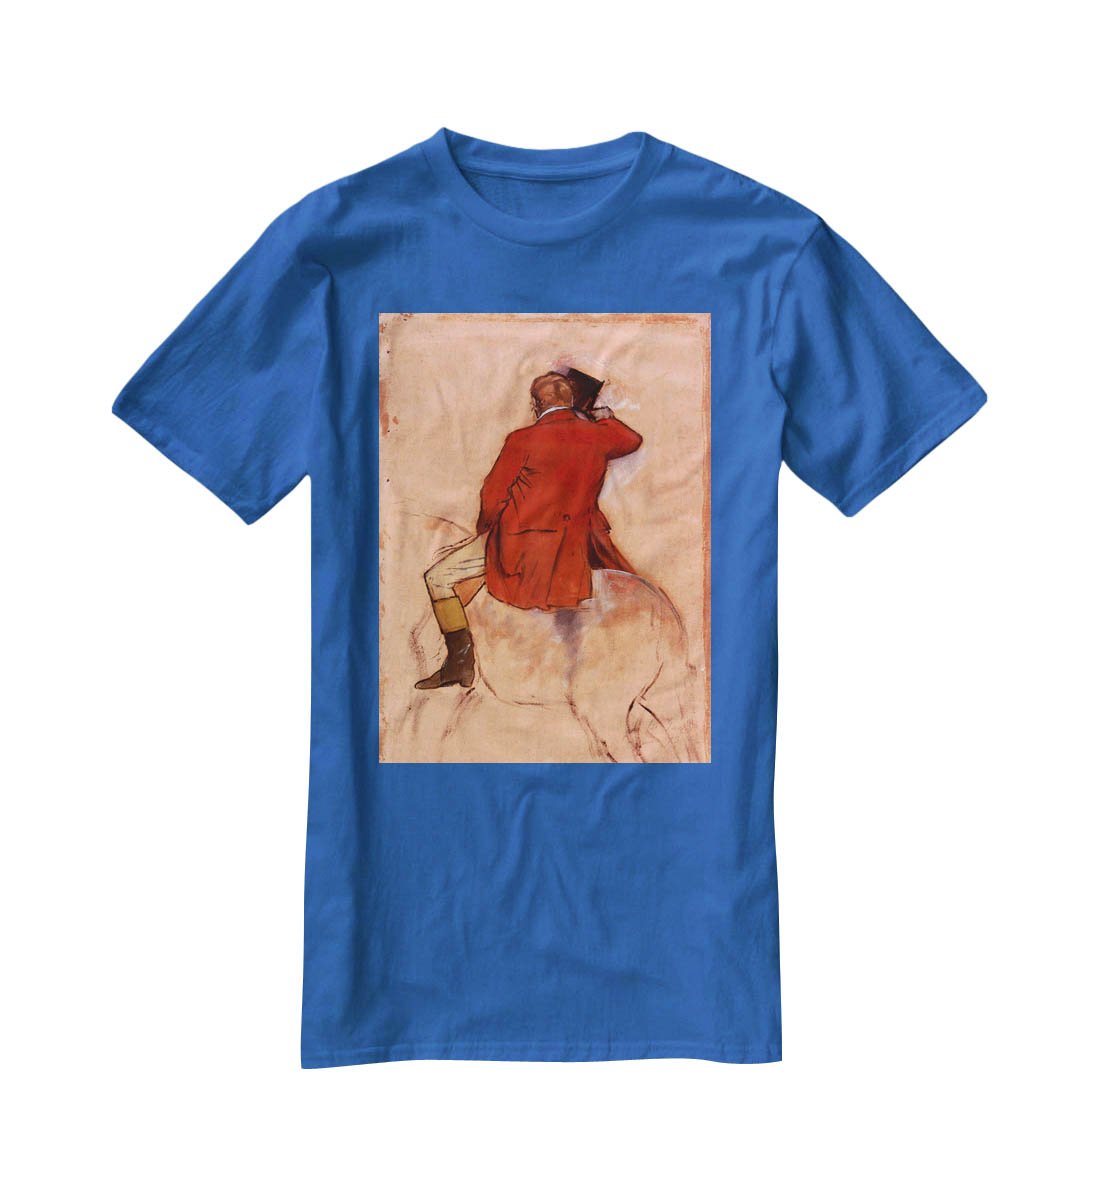 Rider with red jacket by Degas T-Shirt - Canvas Art Rocks - 2